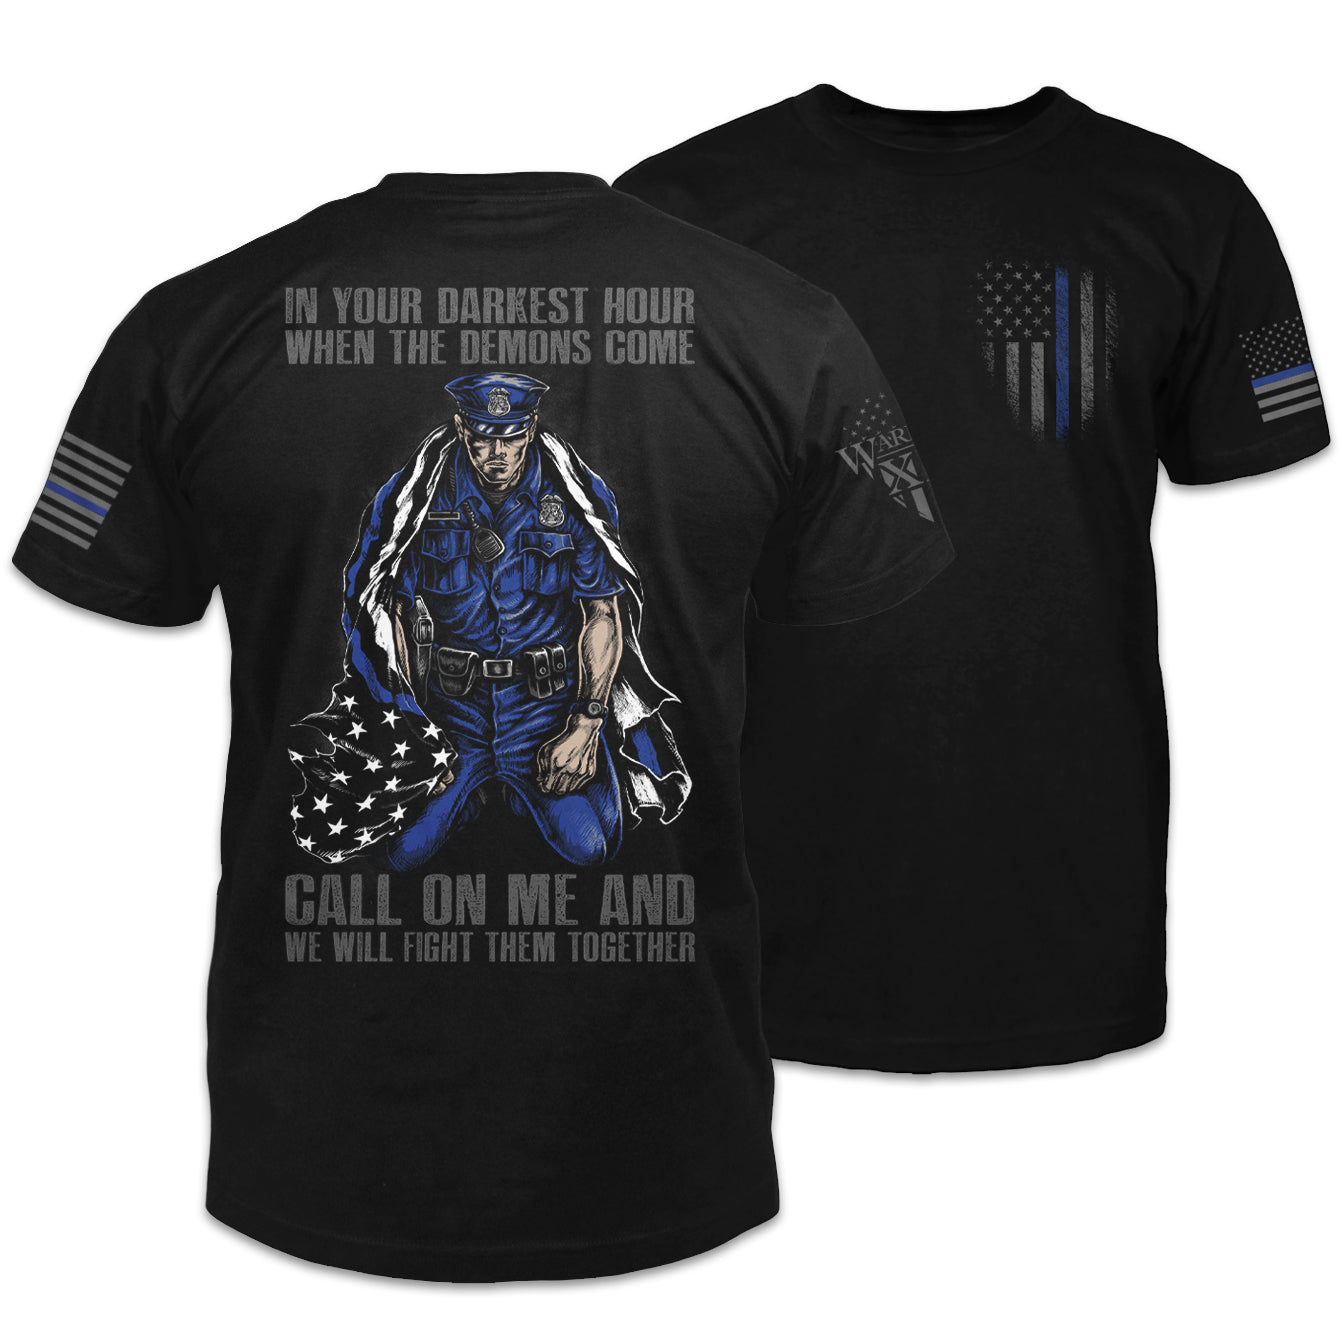 Front & back black t-shirt with the words "In your darkest hour when the demons come, call on me and we will fight them together" with a police officer printed on the shirt.